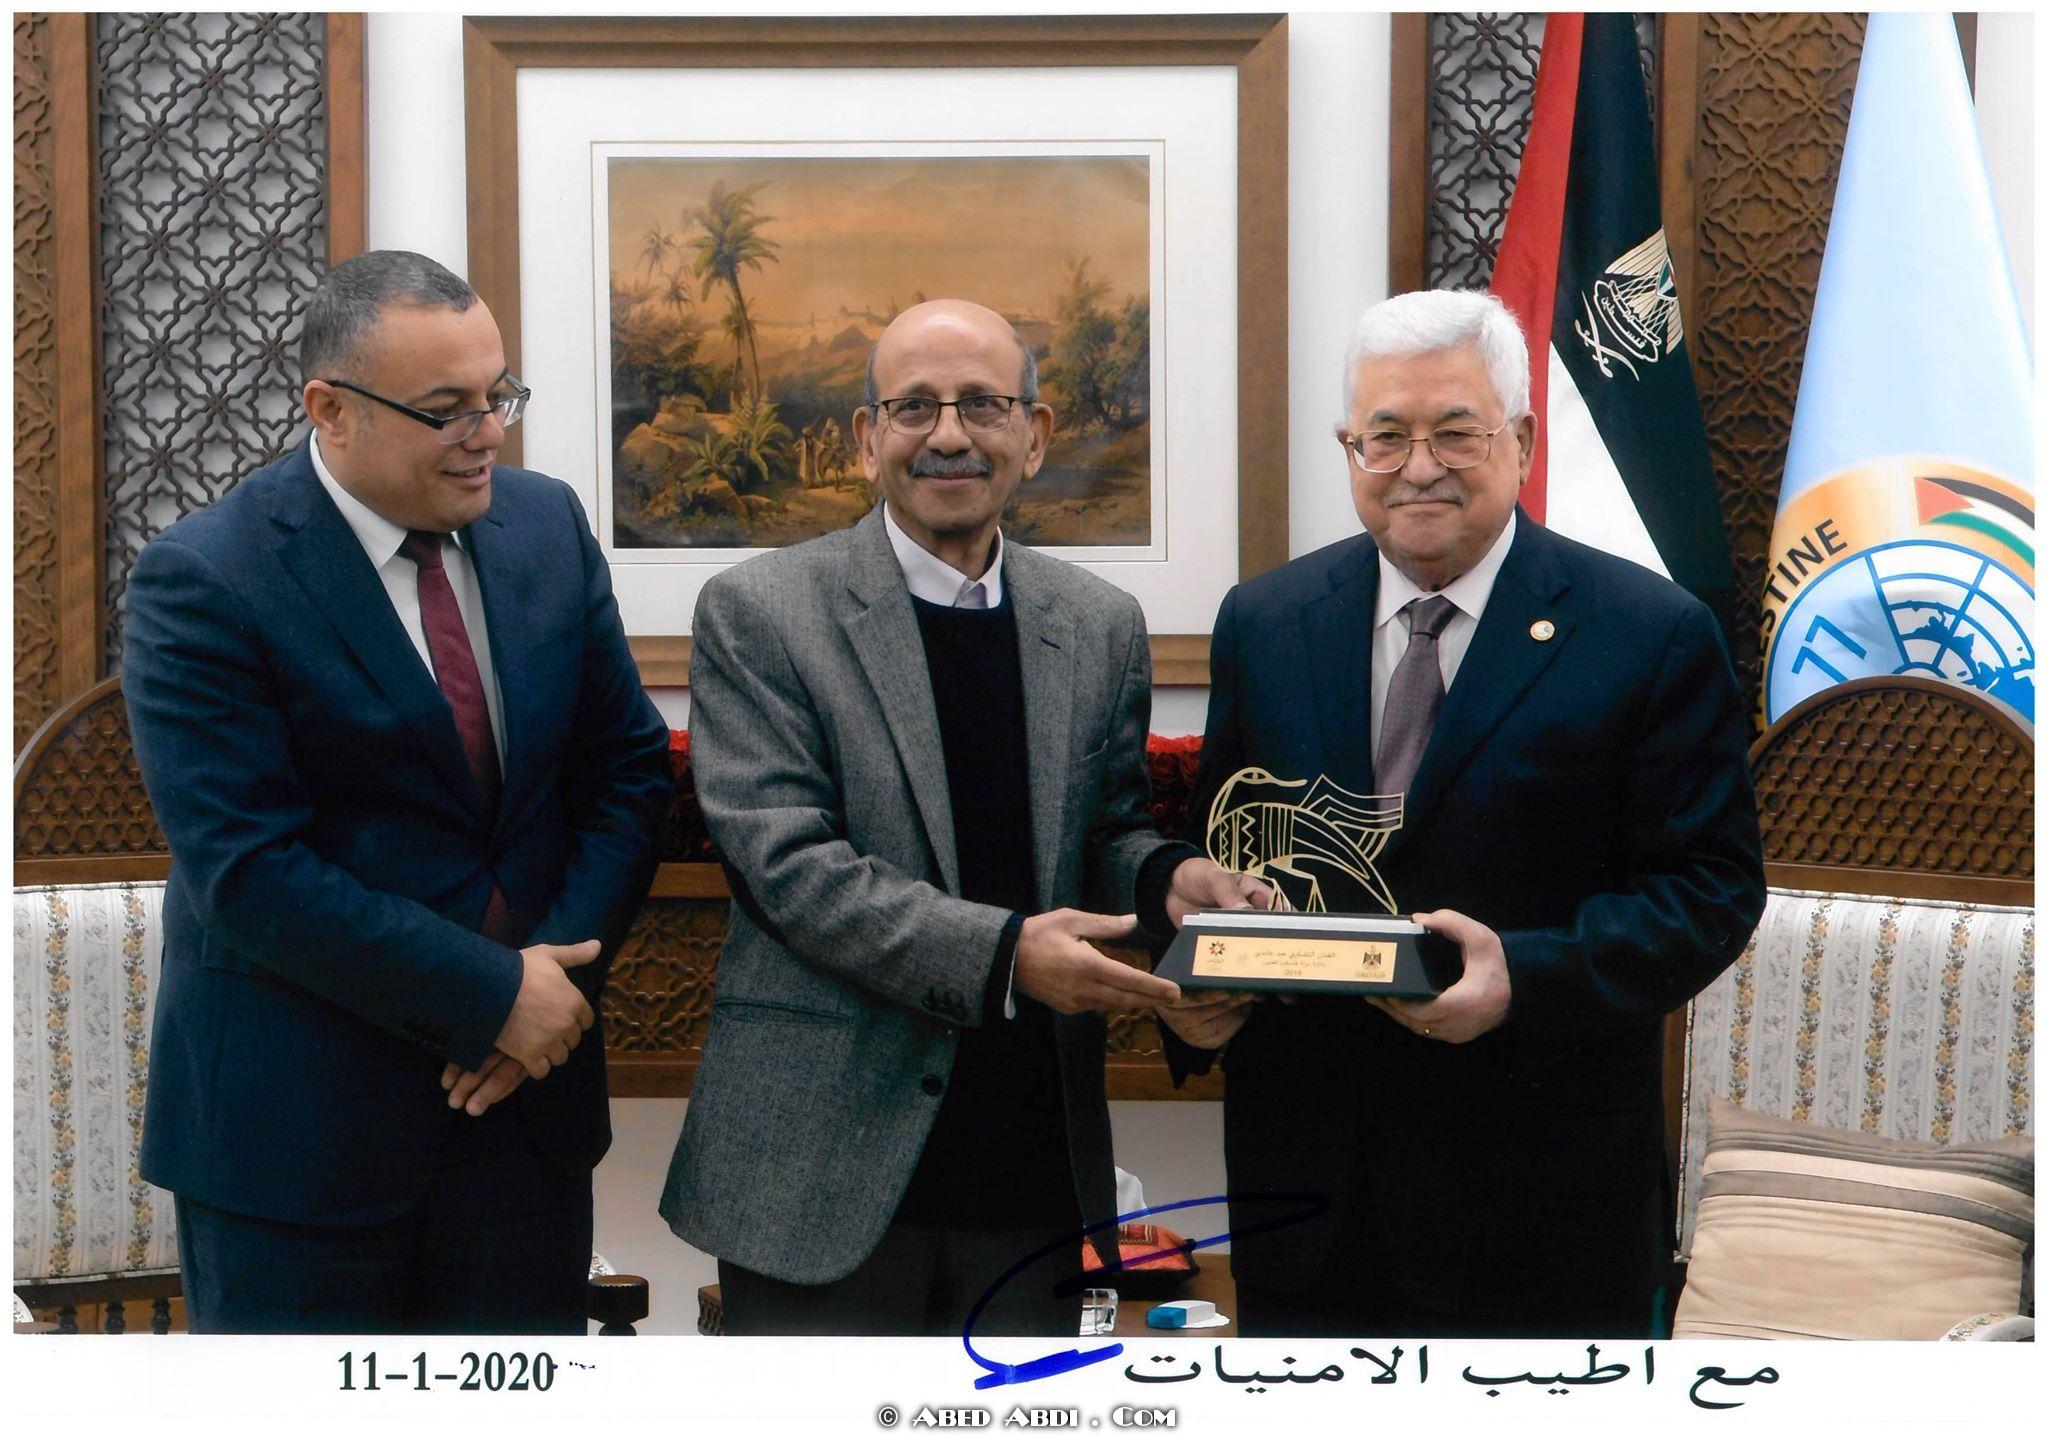 Abed Abdi receiving the Palestine Prize from the Palestinian president Mahmoud Abbas and the Palestinian minister of culture.